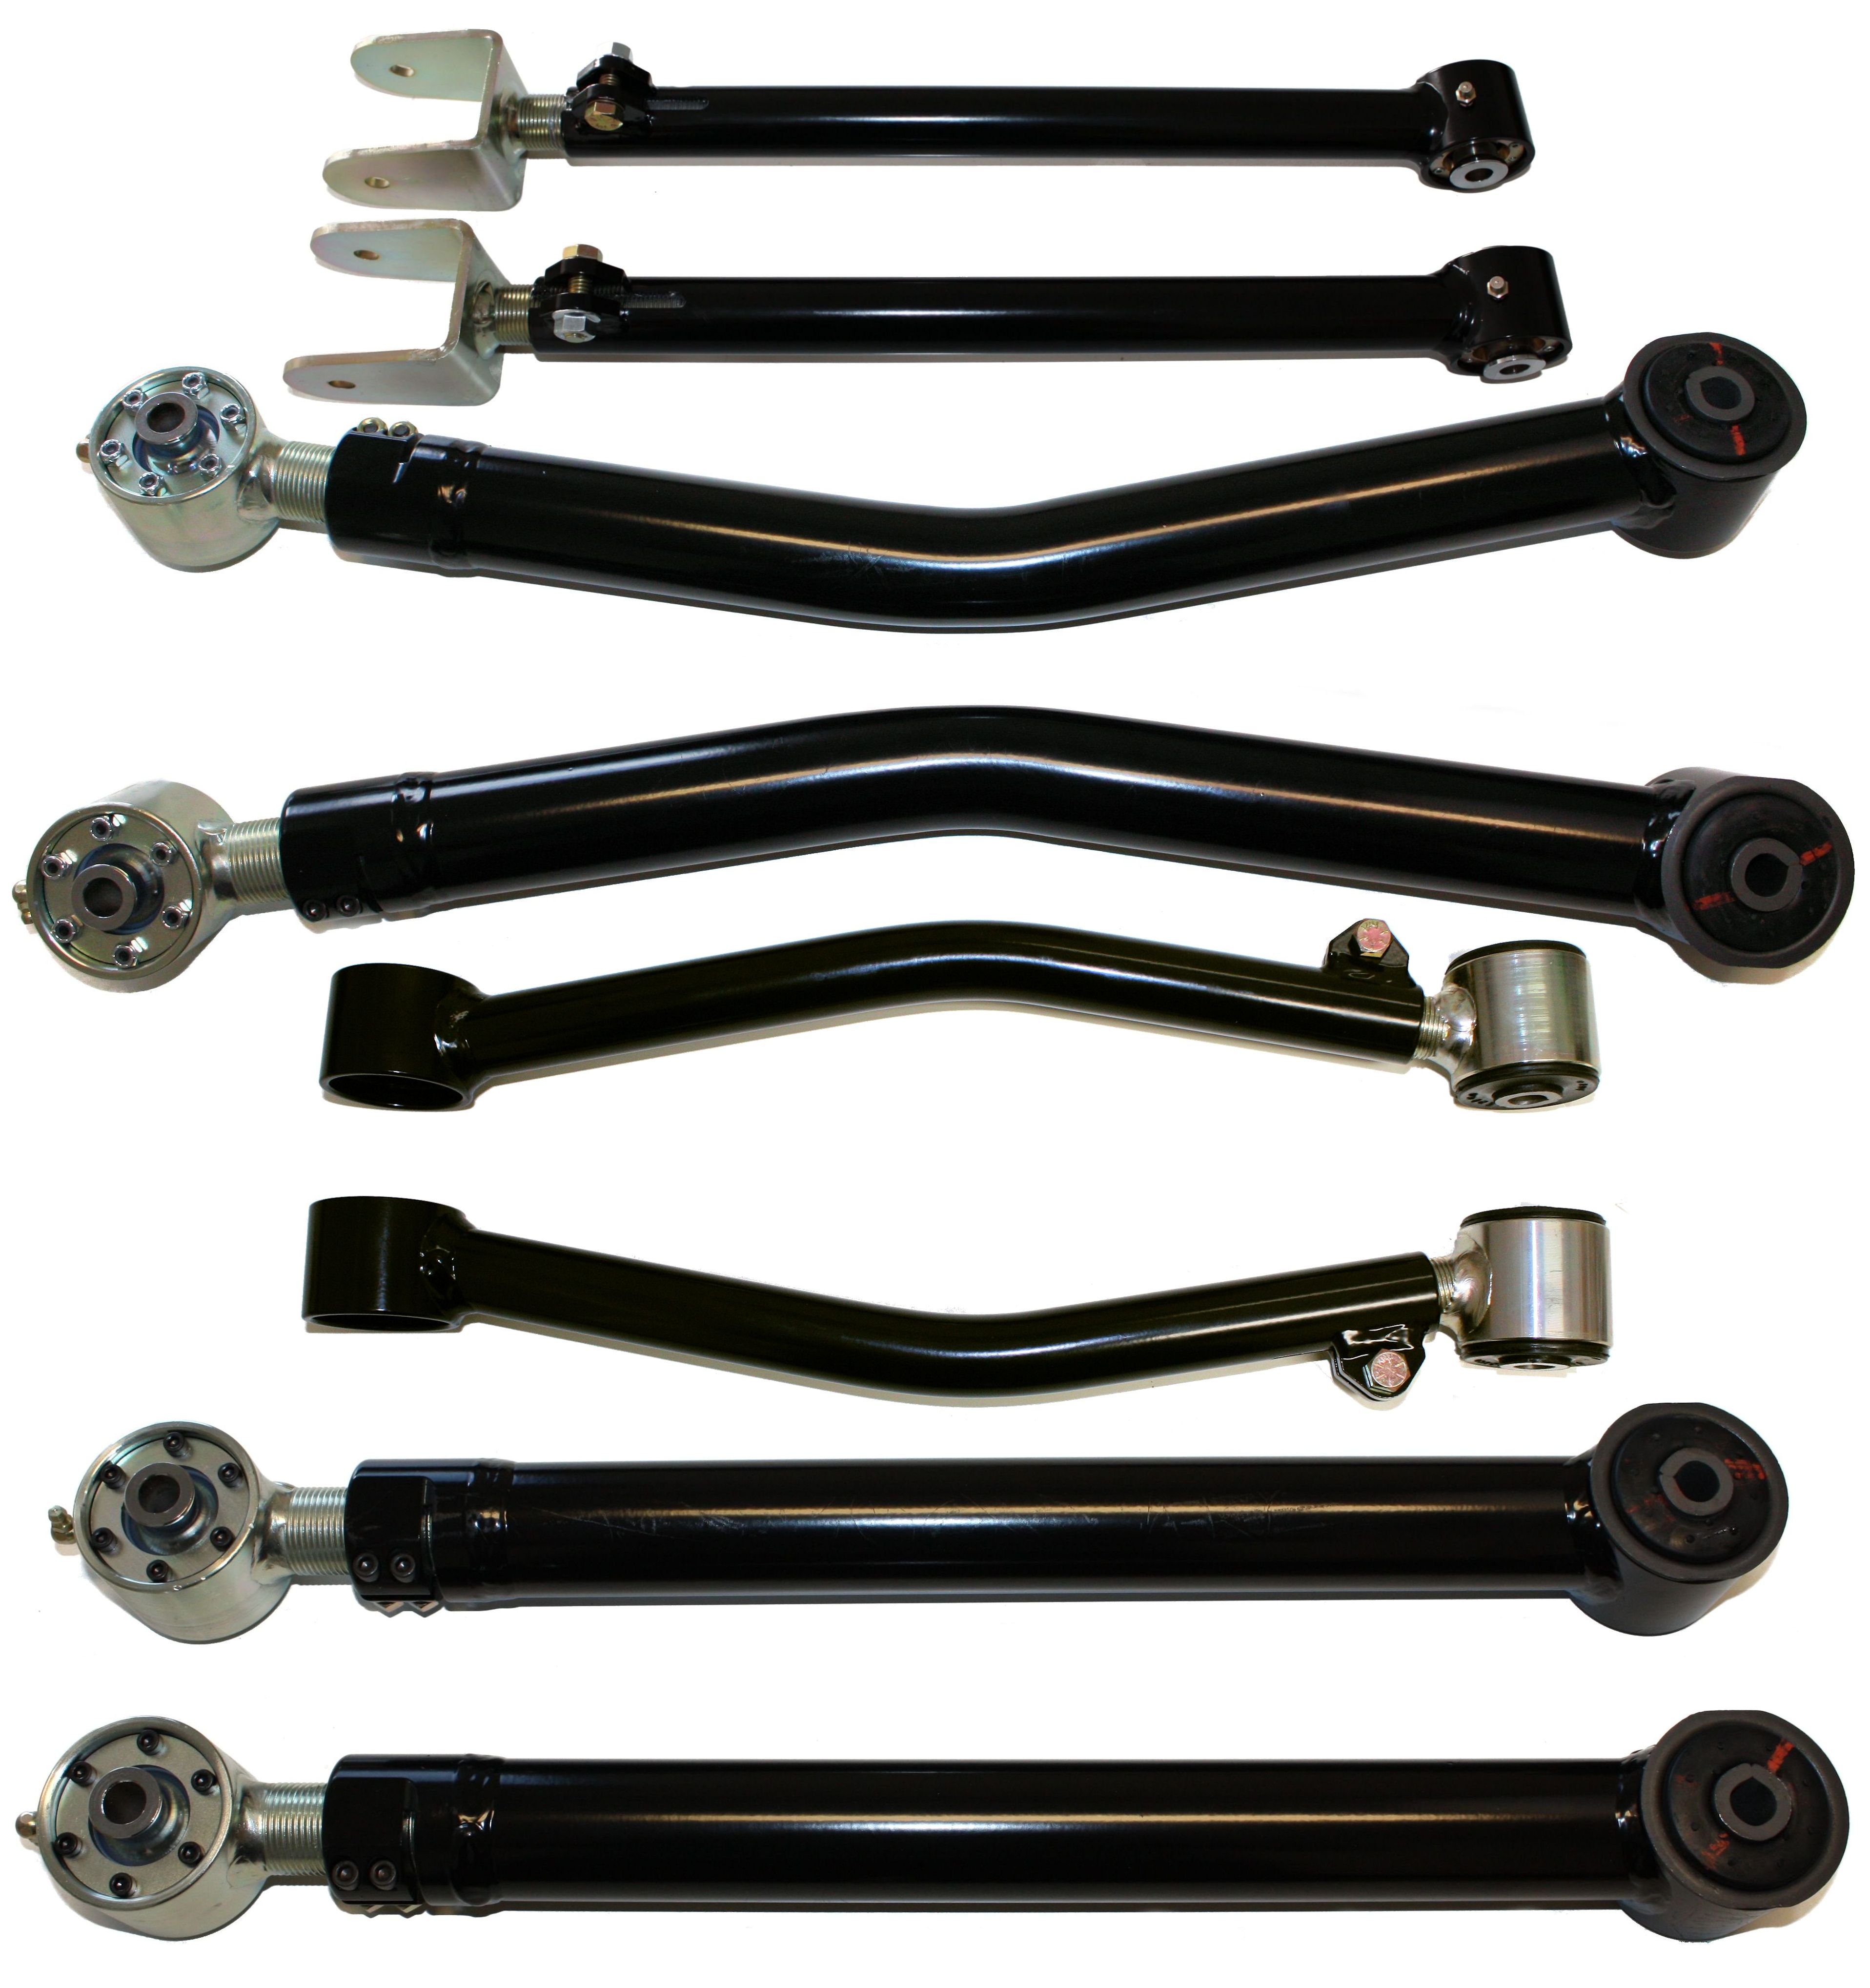 Create Your Own JK Control Arm Set